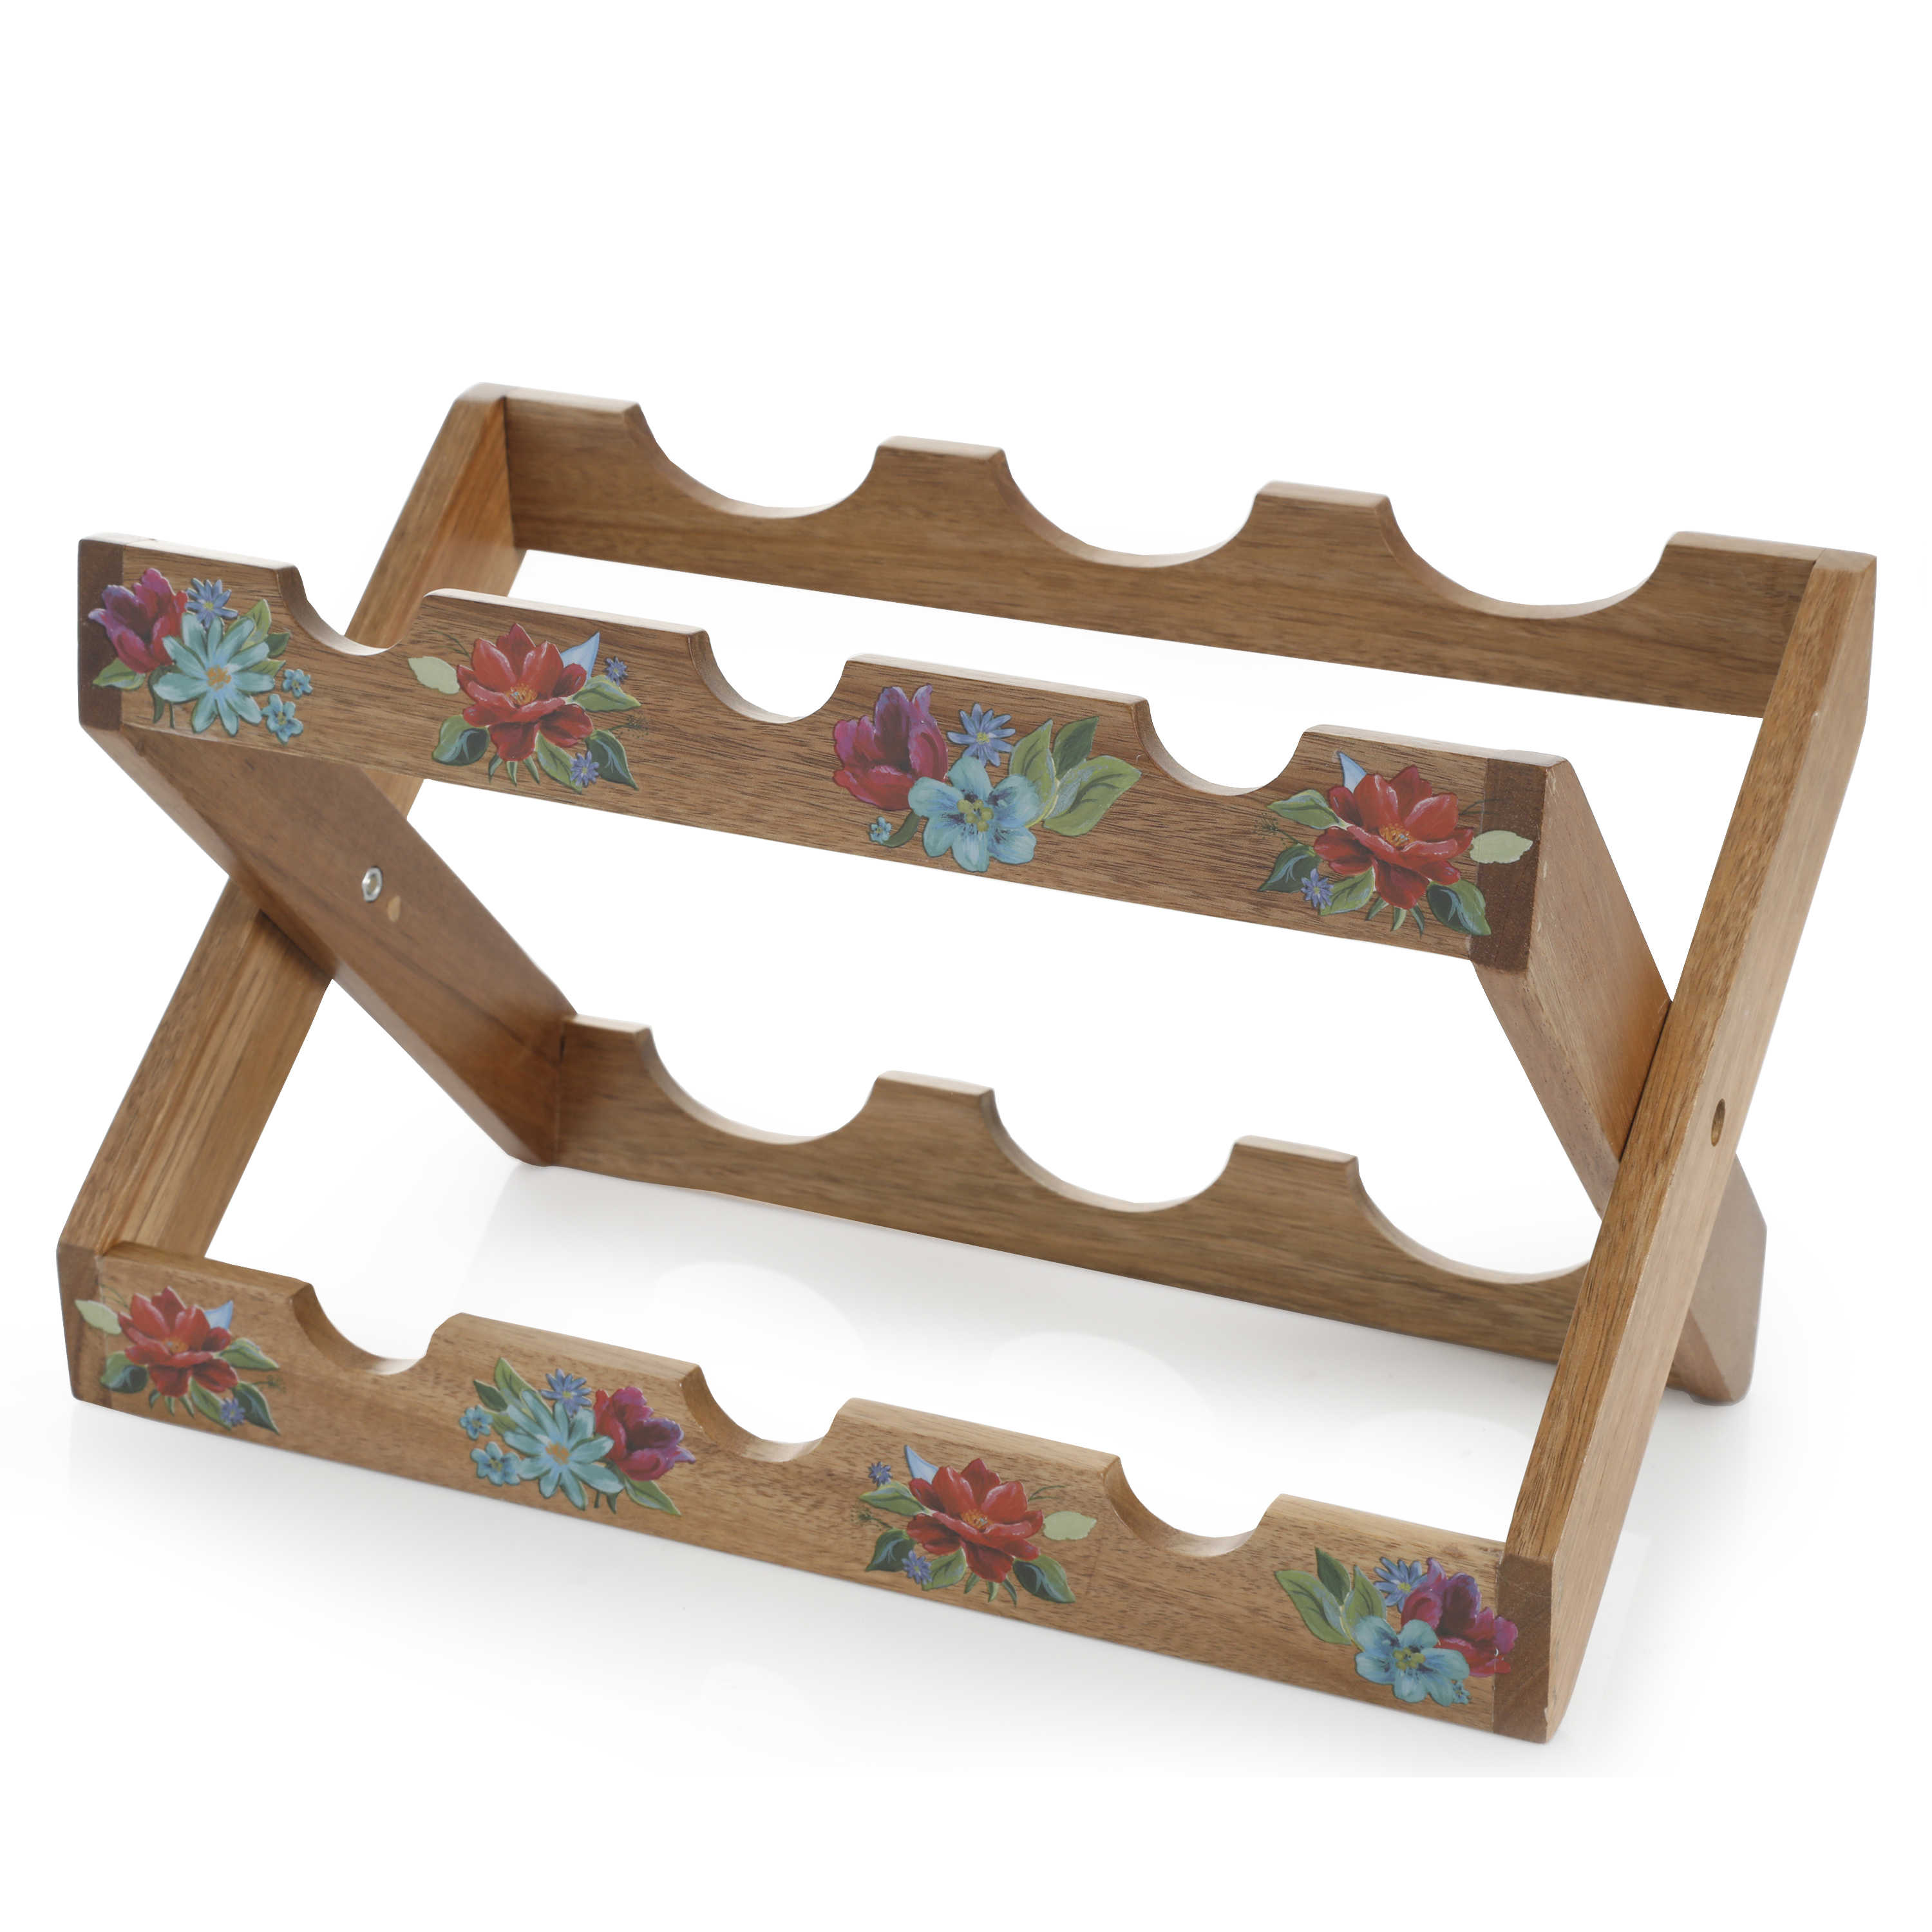 The Pioneer Woman Spring Bouquet 13.9-inch Acacia Wood Wine Rack - image 1 of 6